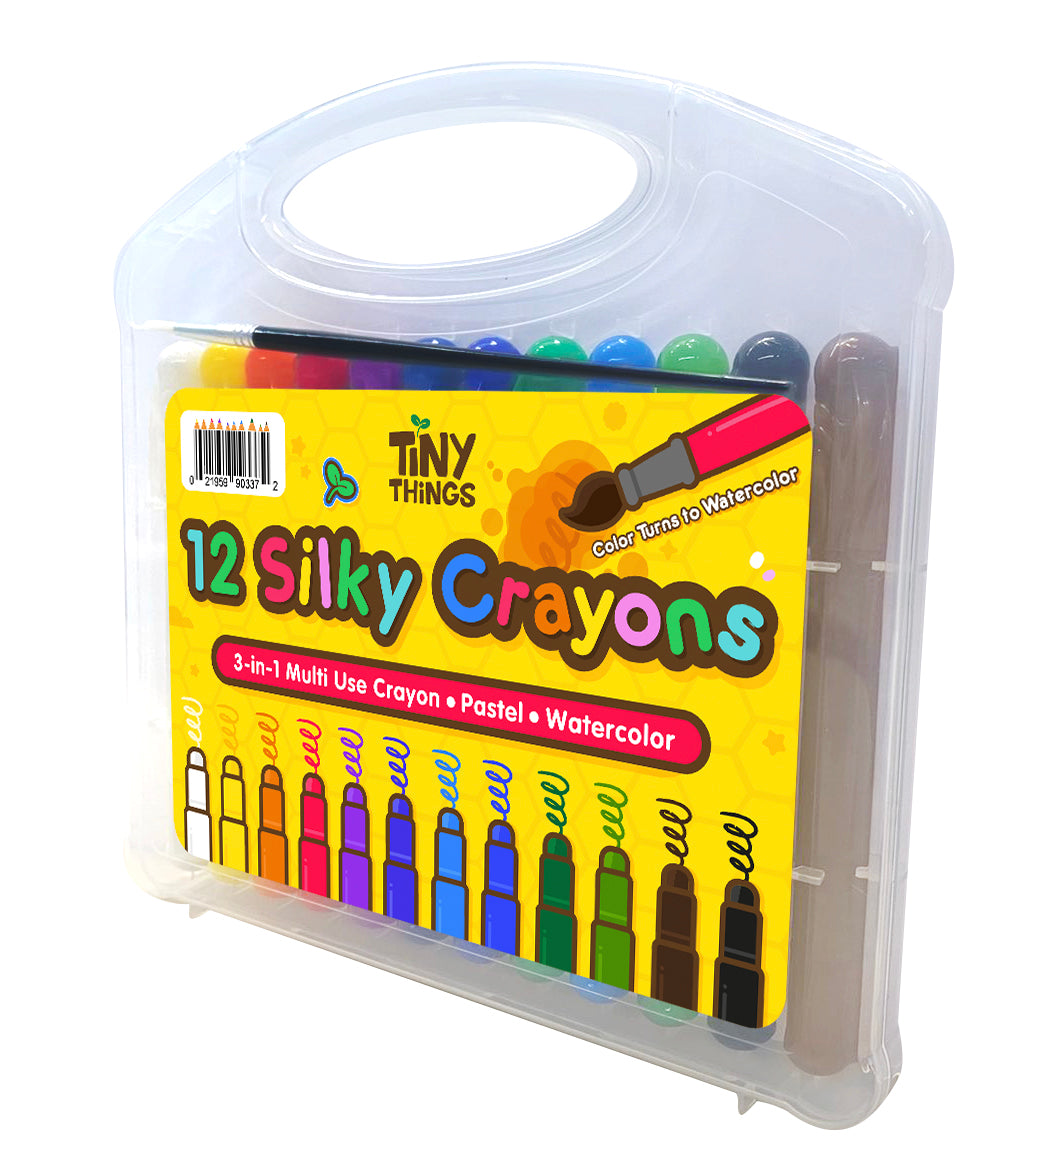 Mini Crayon Sets for Kids, 12 Pack, Contain 8 Mini Crayons in Each Set ·  Art Creativity